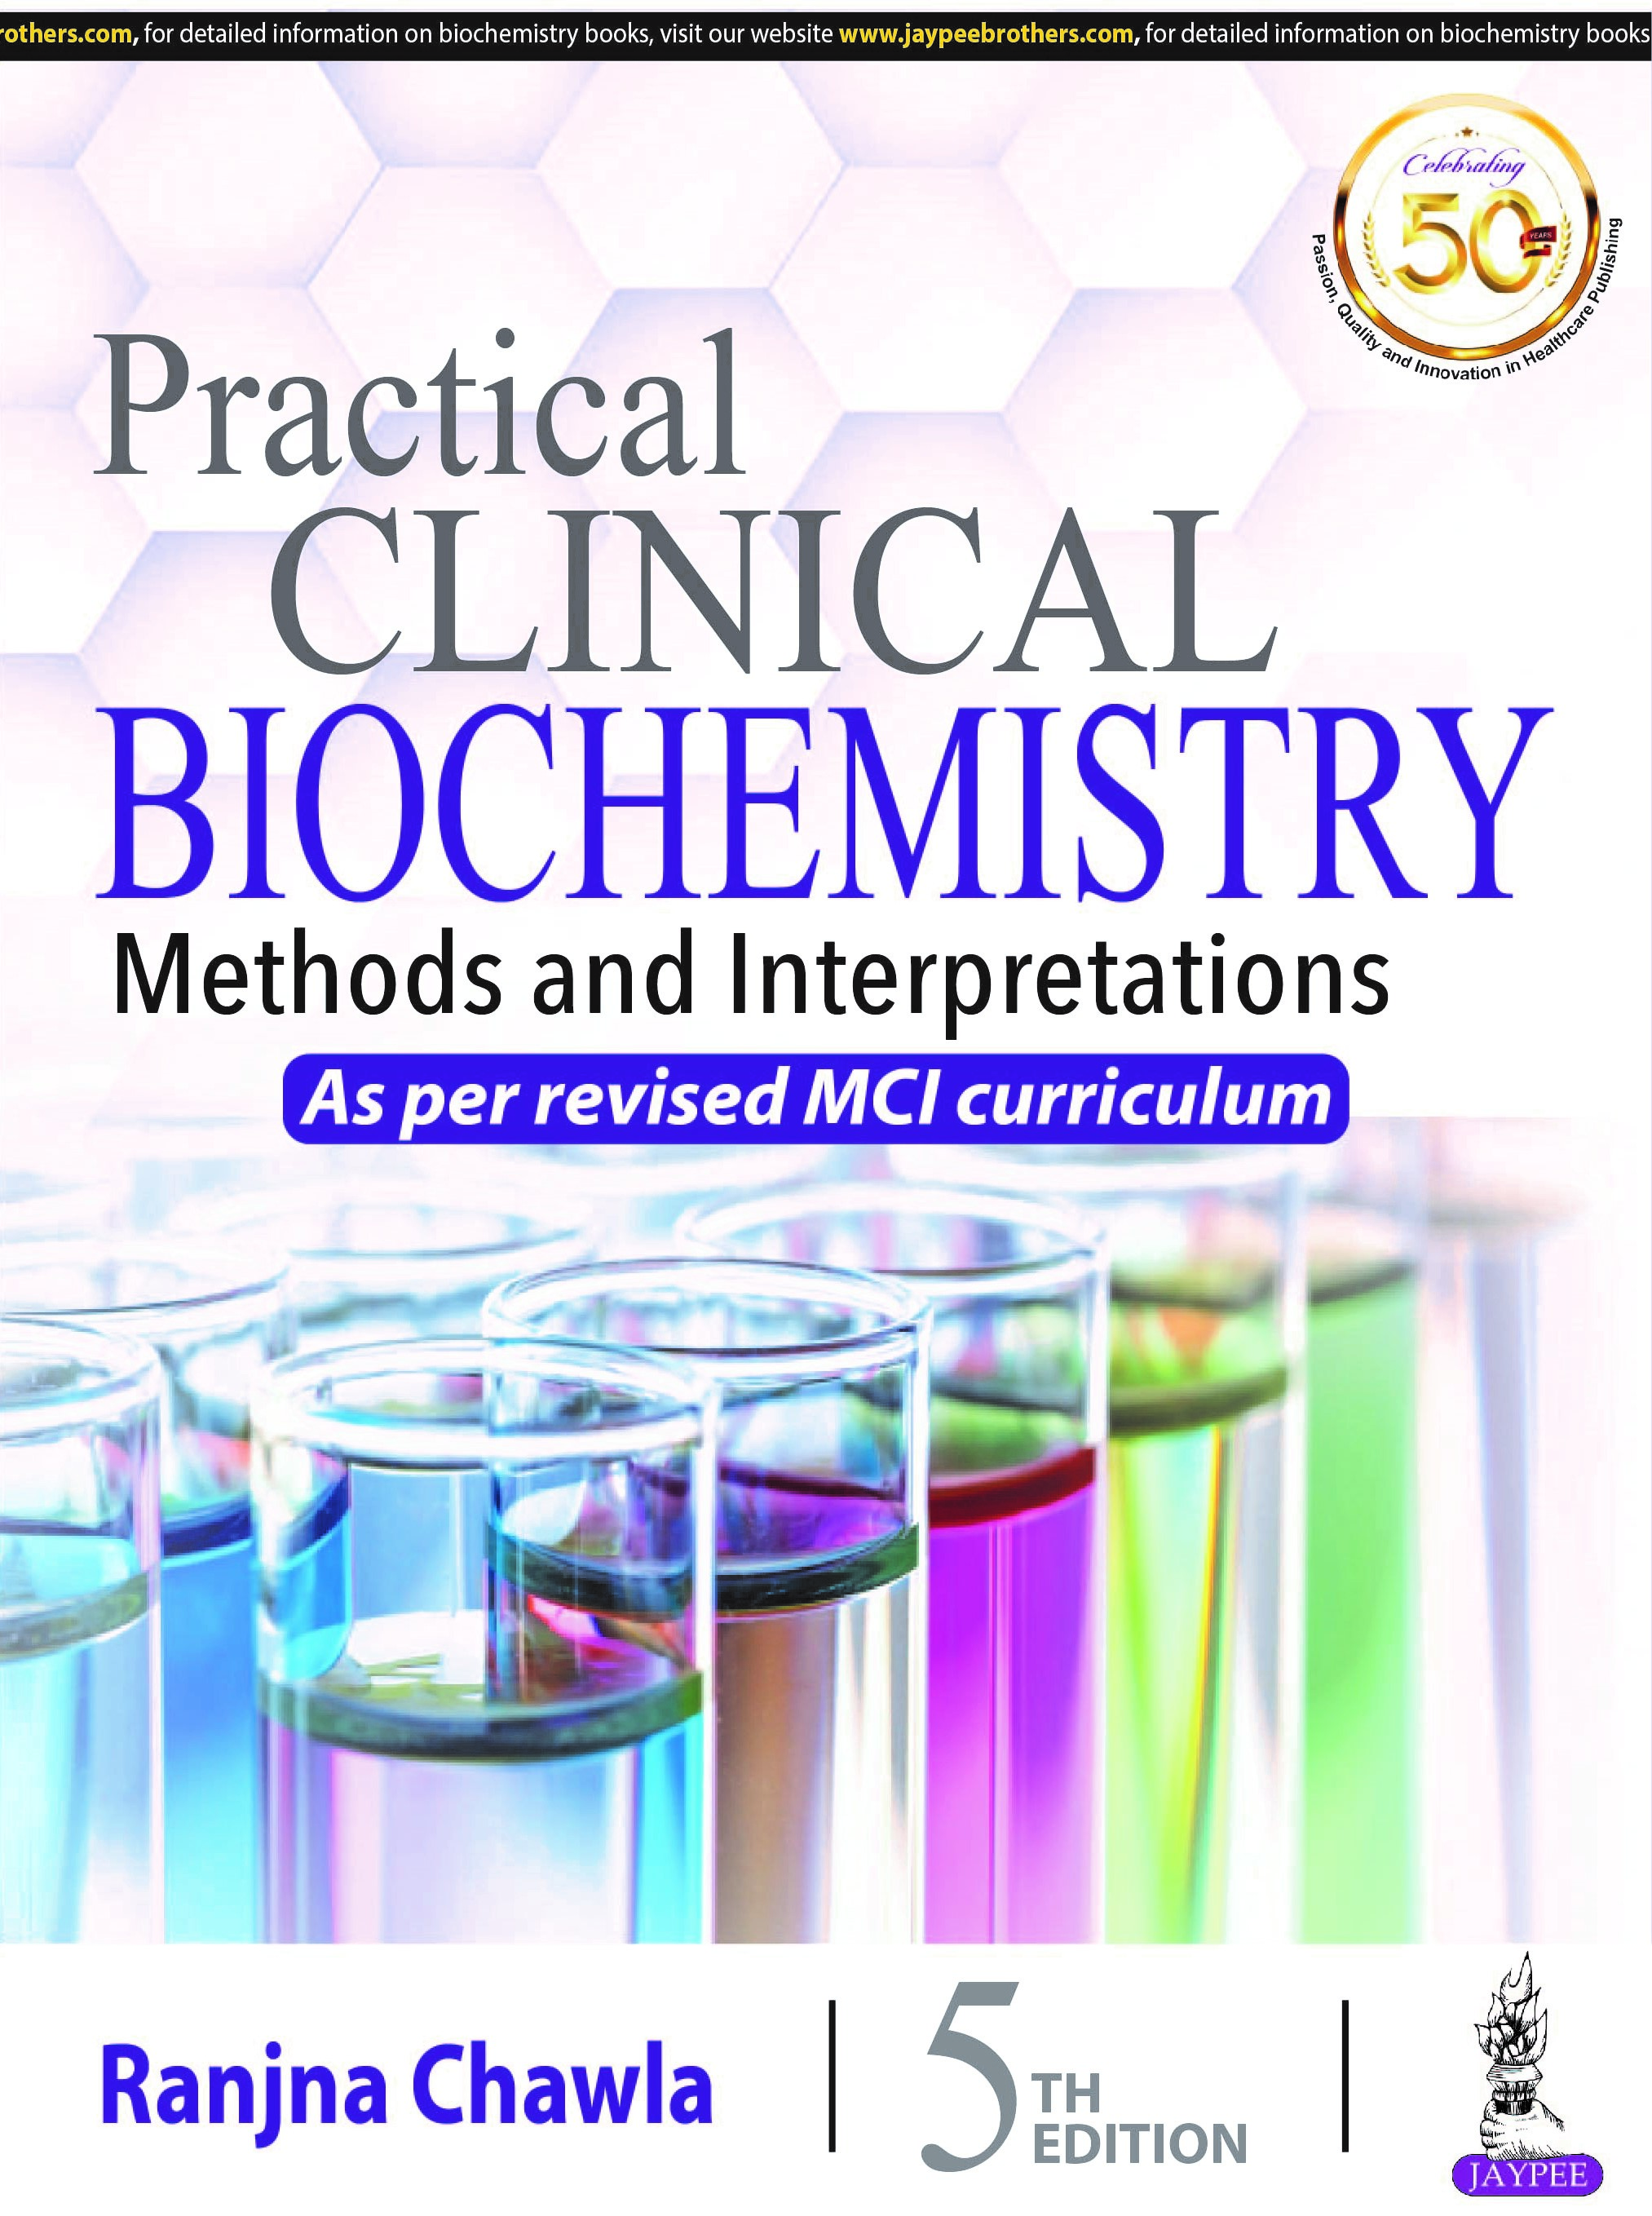 practical-clinical-biochemistry-methods-and-interpretations